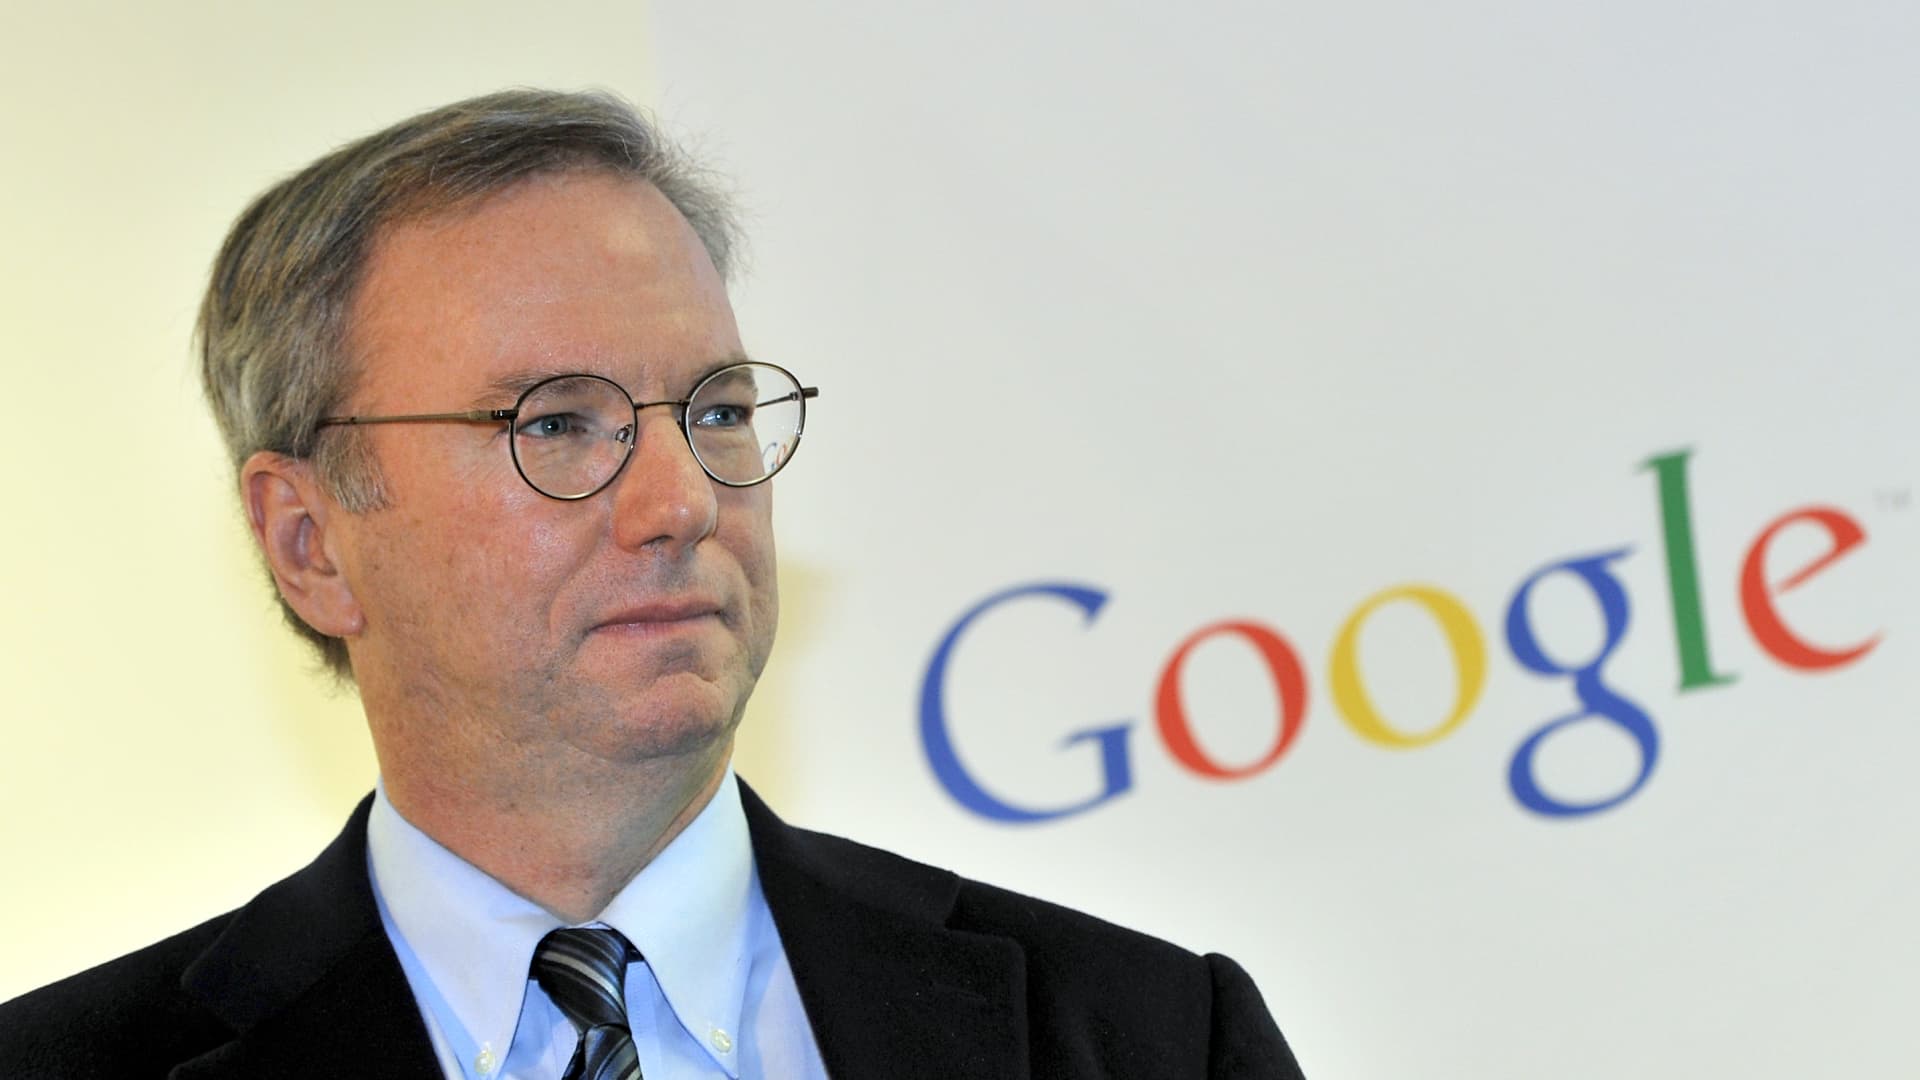 Ex-Google CEO Eric Schmidt on why people should return to the office